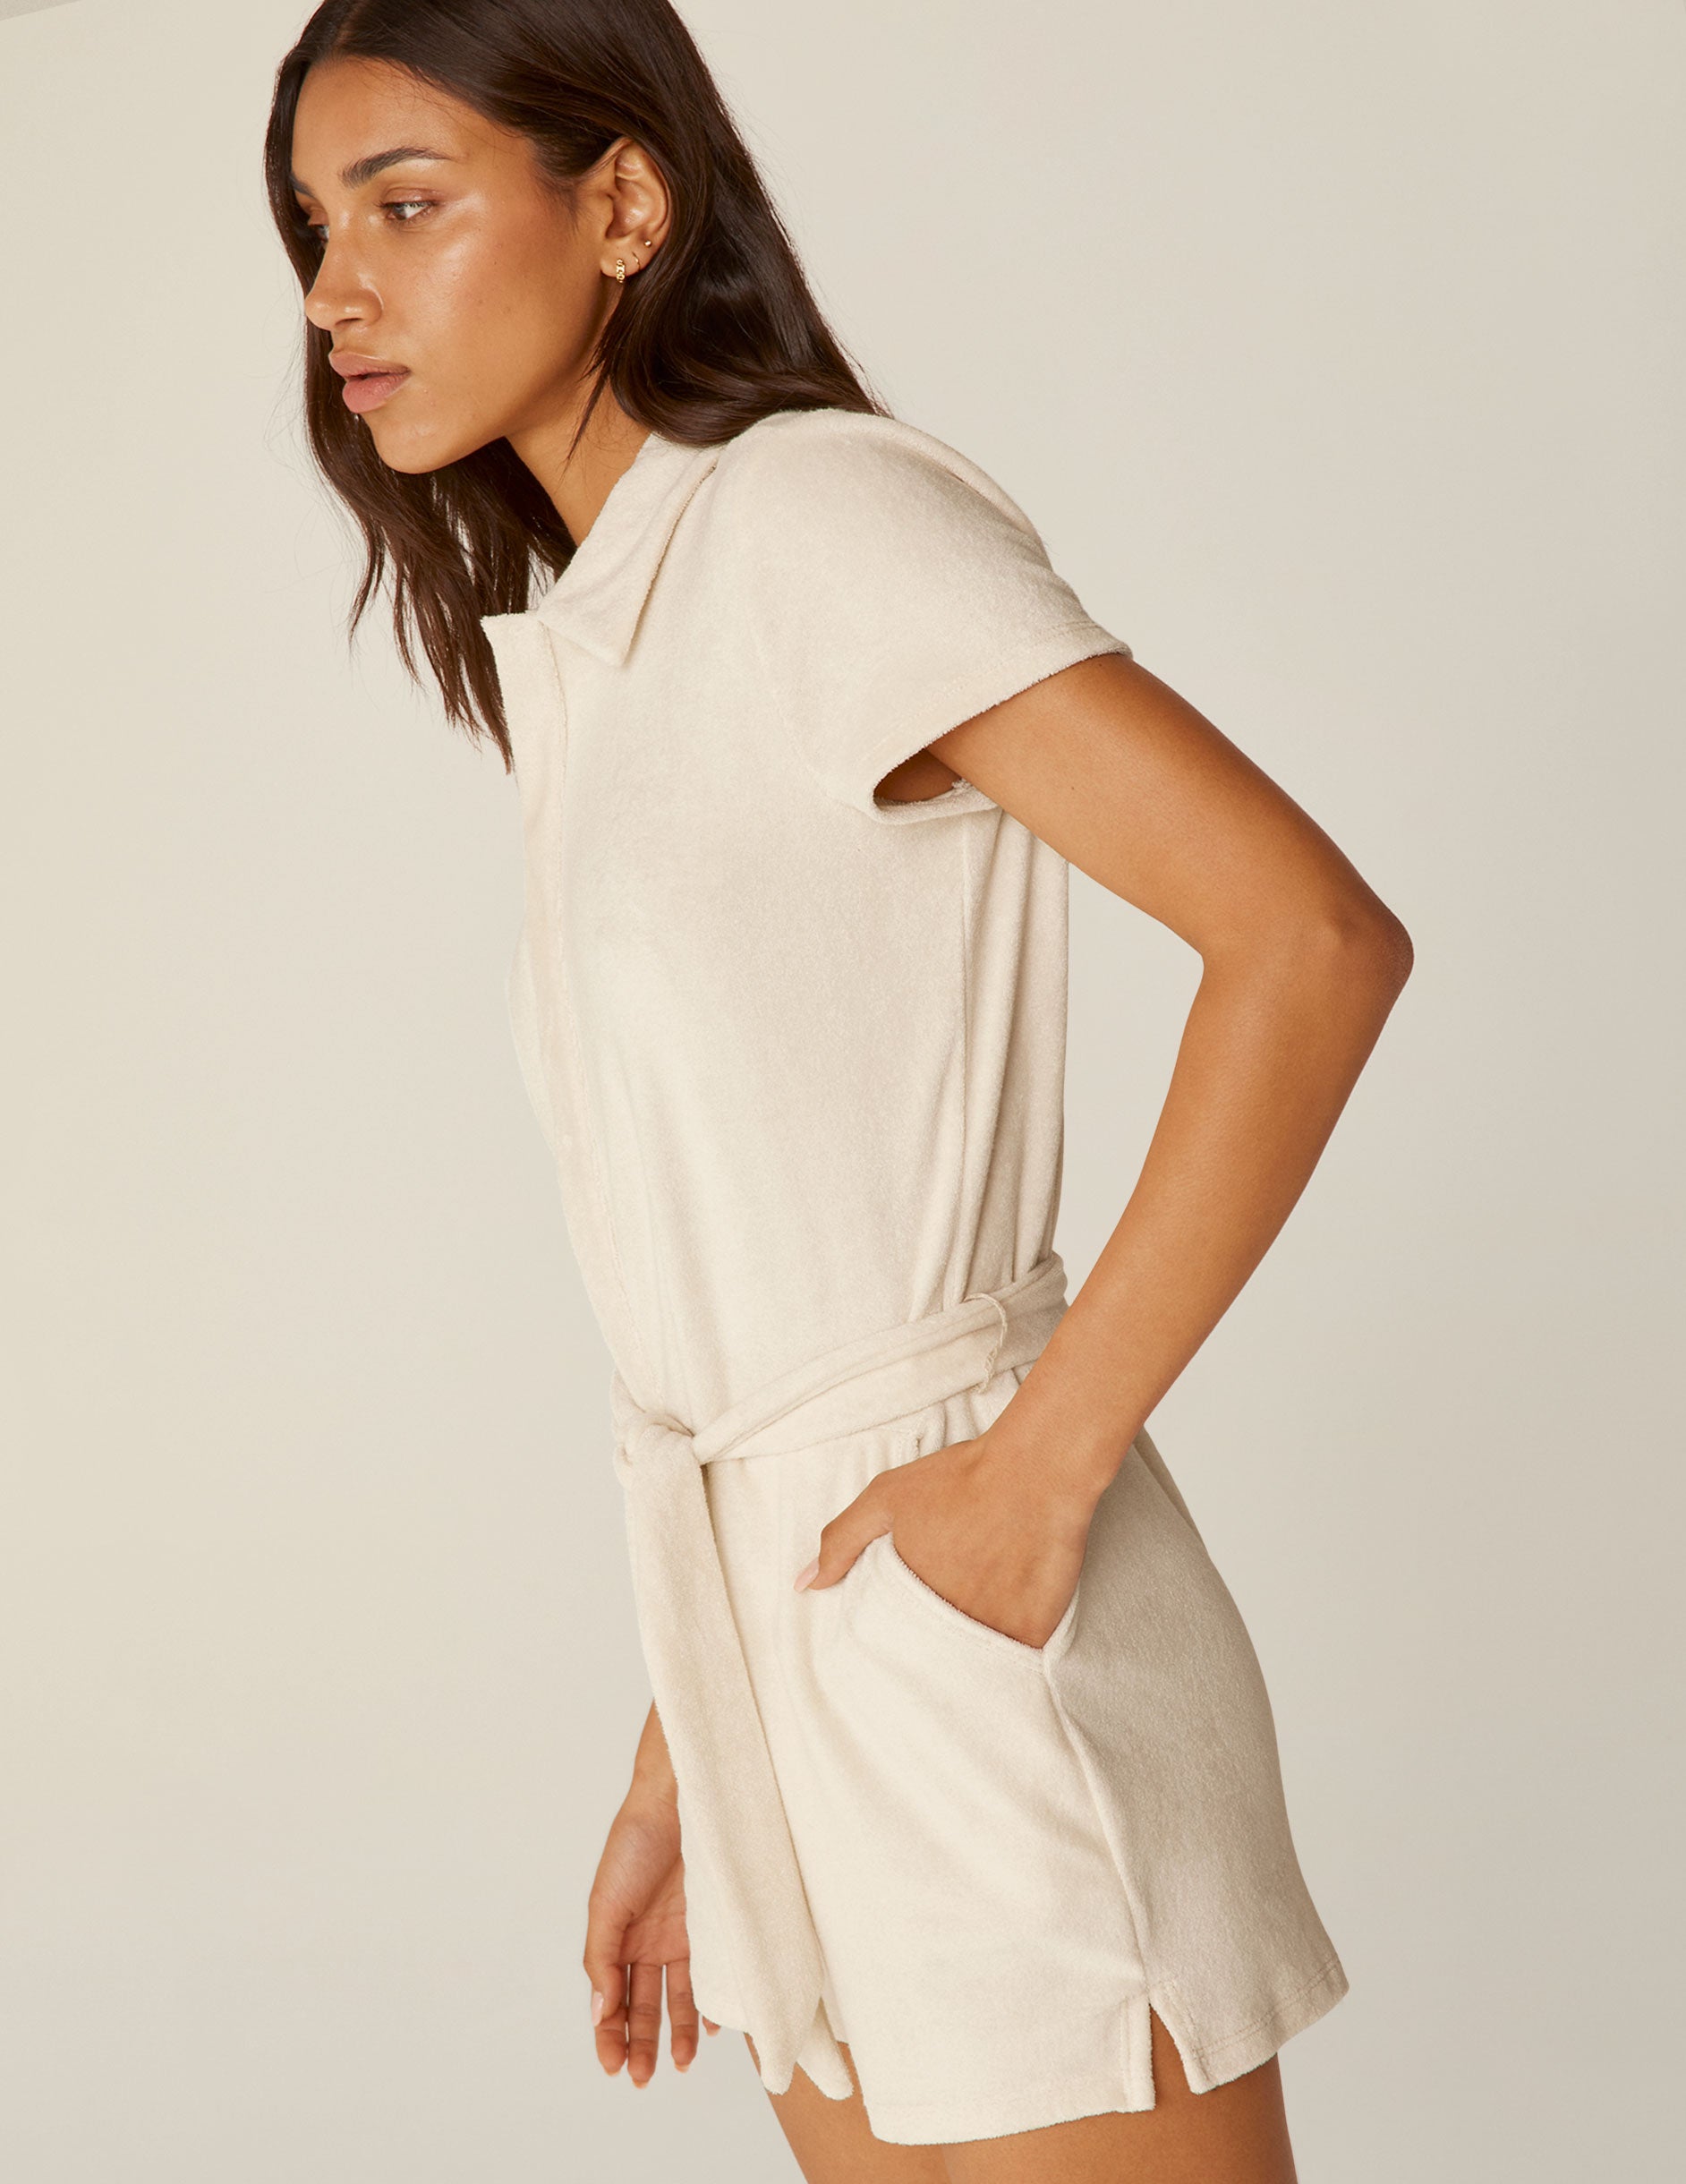 white collared terry fabric romper with a tie at the waistband.